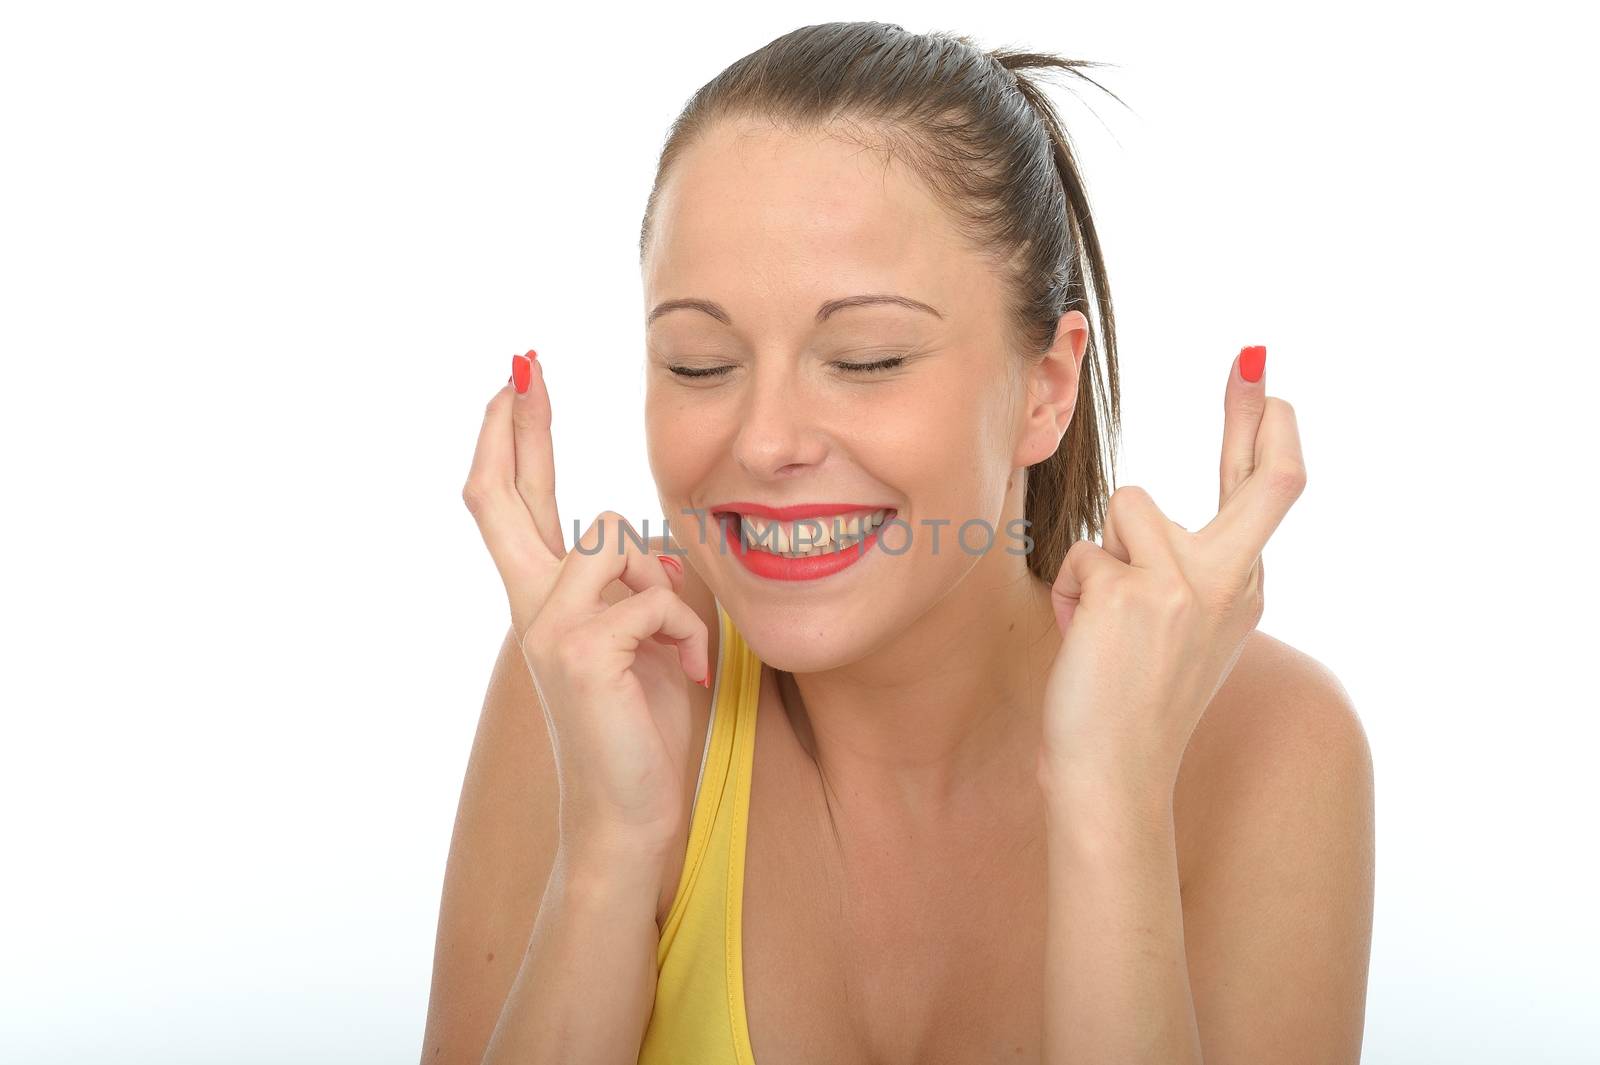 Portrait of a Happy Young Woman With Her Fingers Crossed by Whiteboxmedia